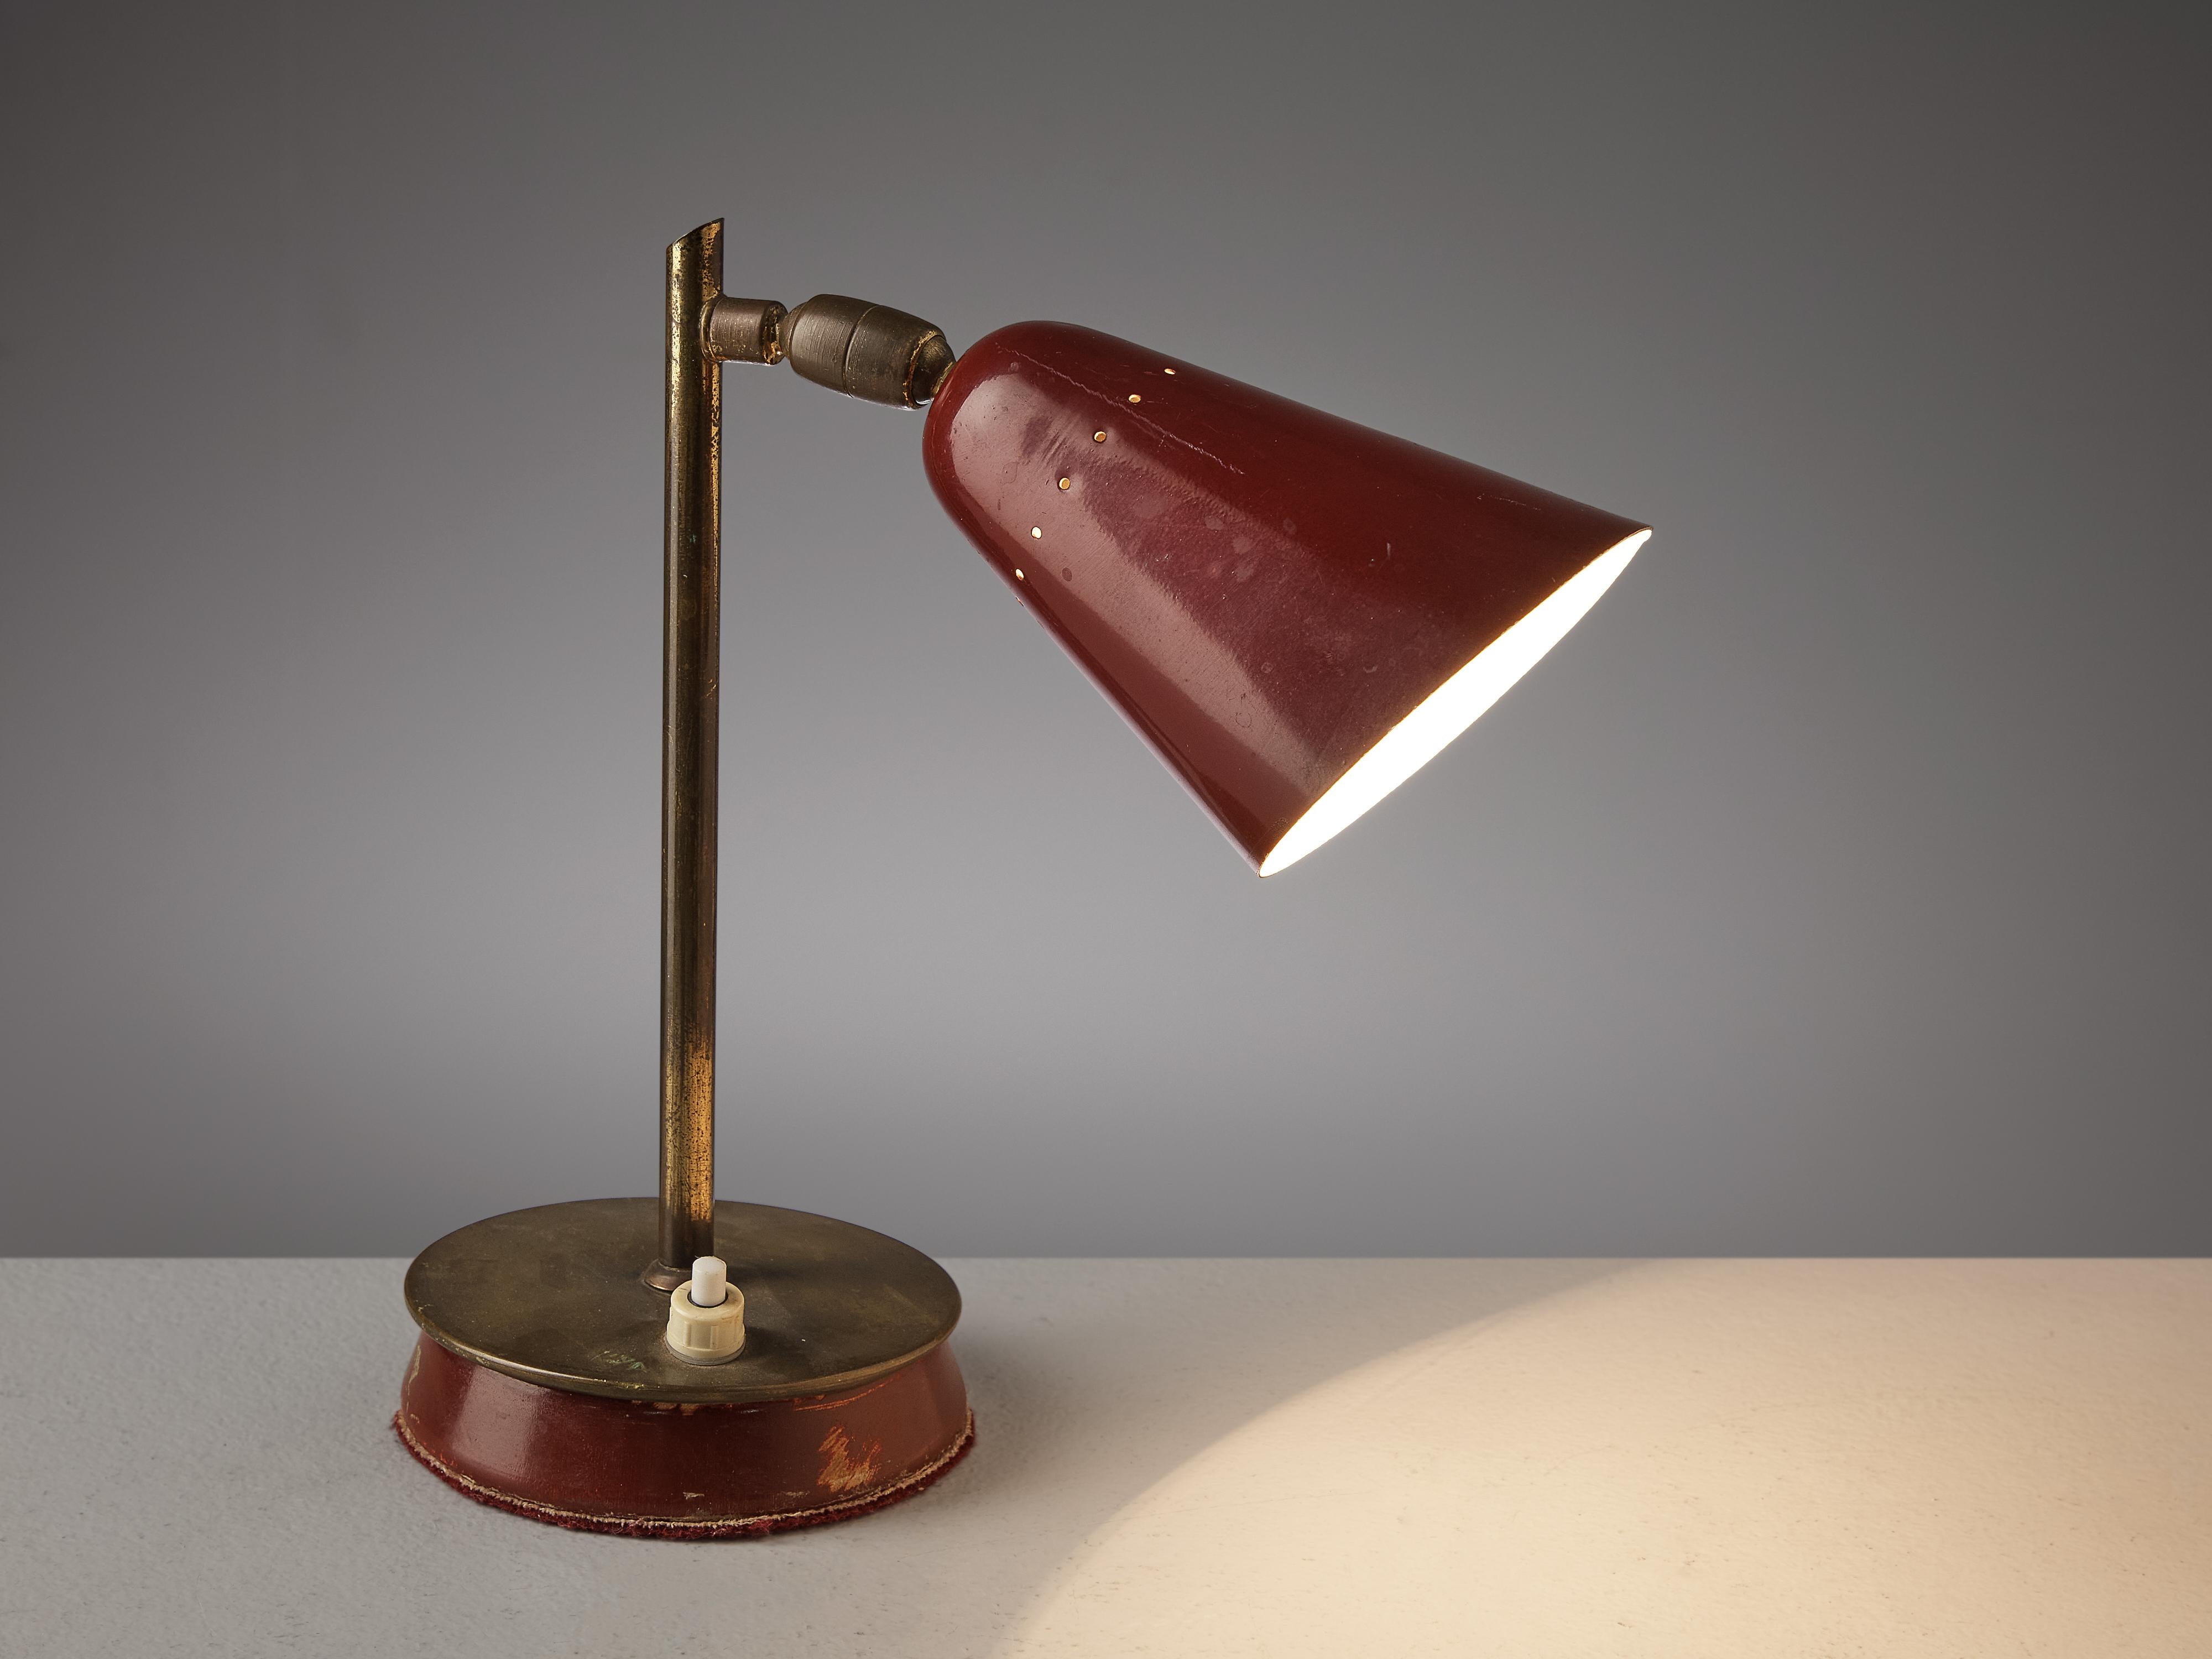 Table lamp, brass, aluminum, metal, Italy, 1960s.

This table desk lamp is stunningly executed in brass with a red color. It features a simple yet nice shade in a bright red color. The base of this is a round made out of brass together with the